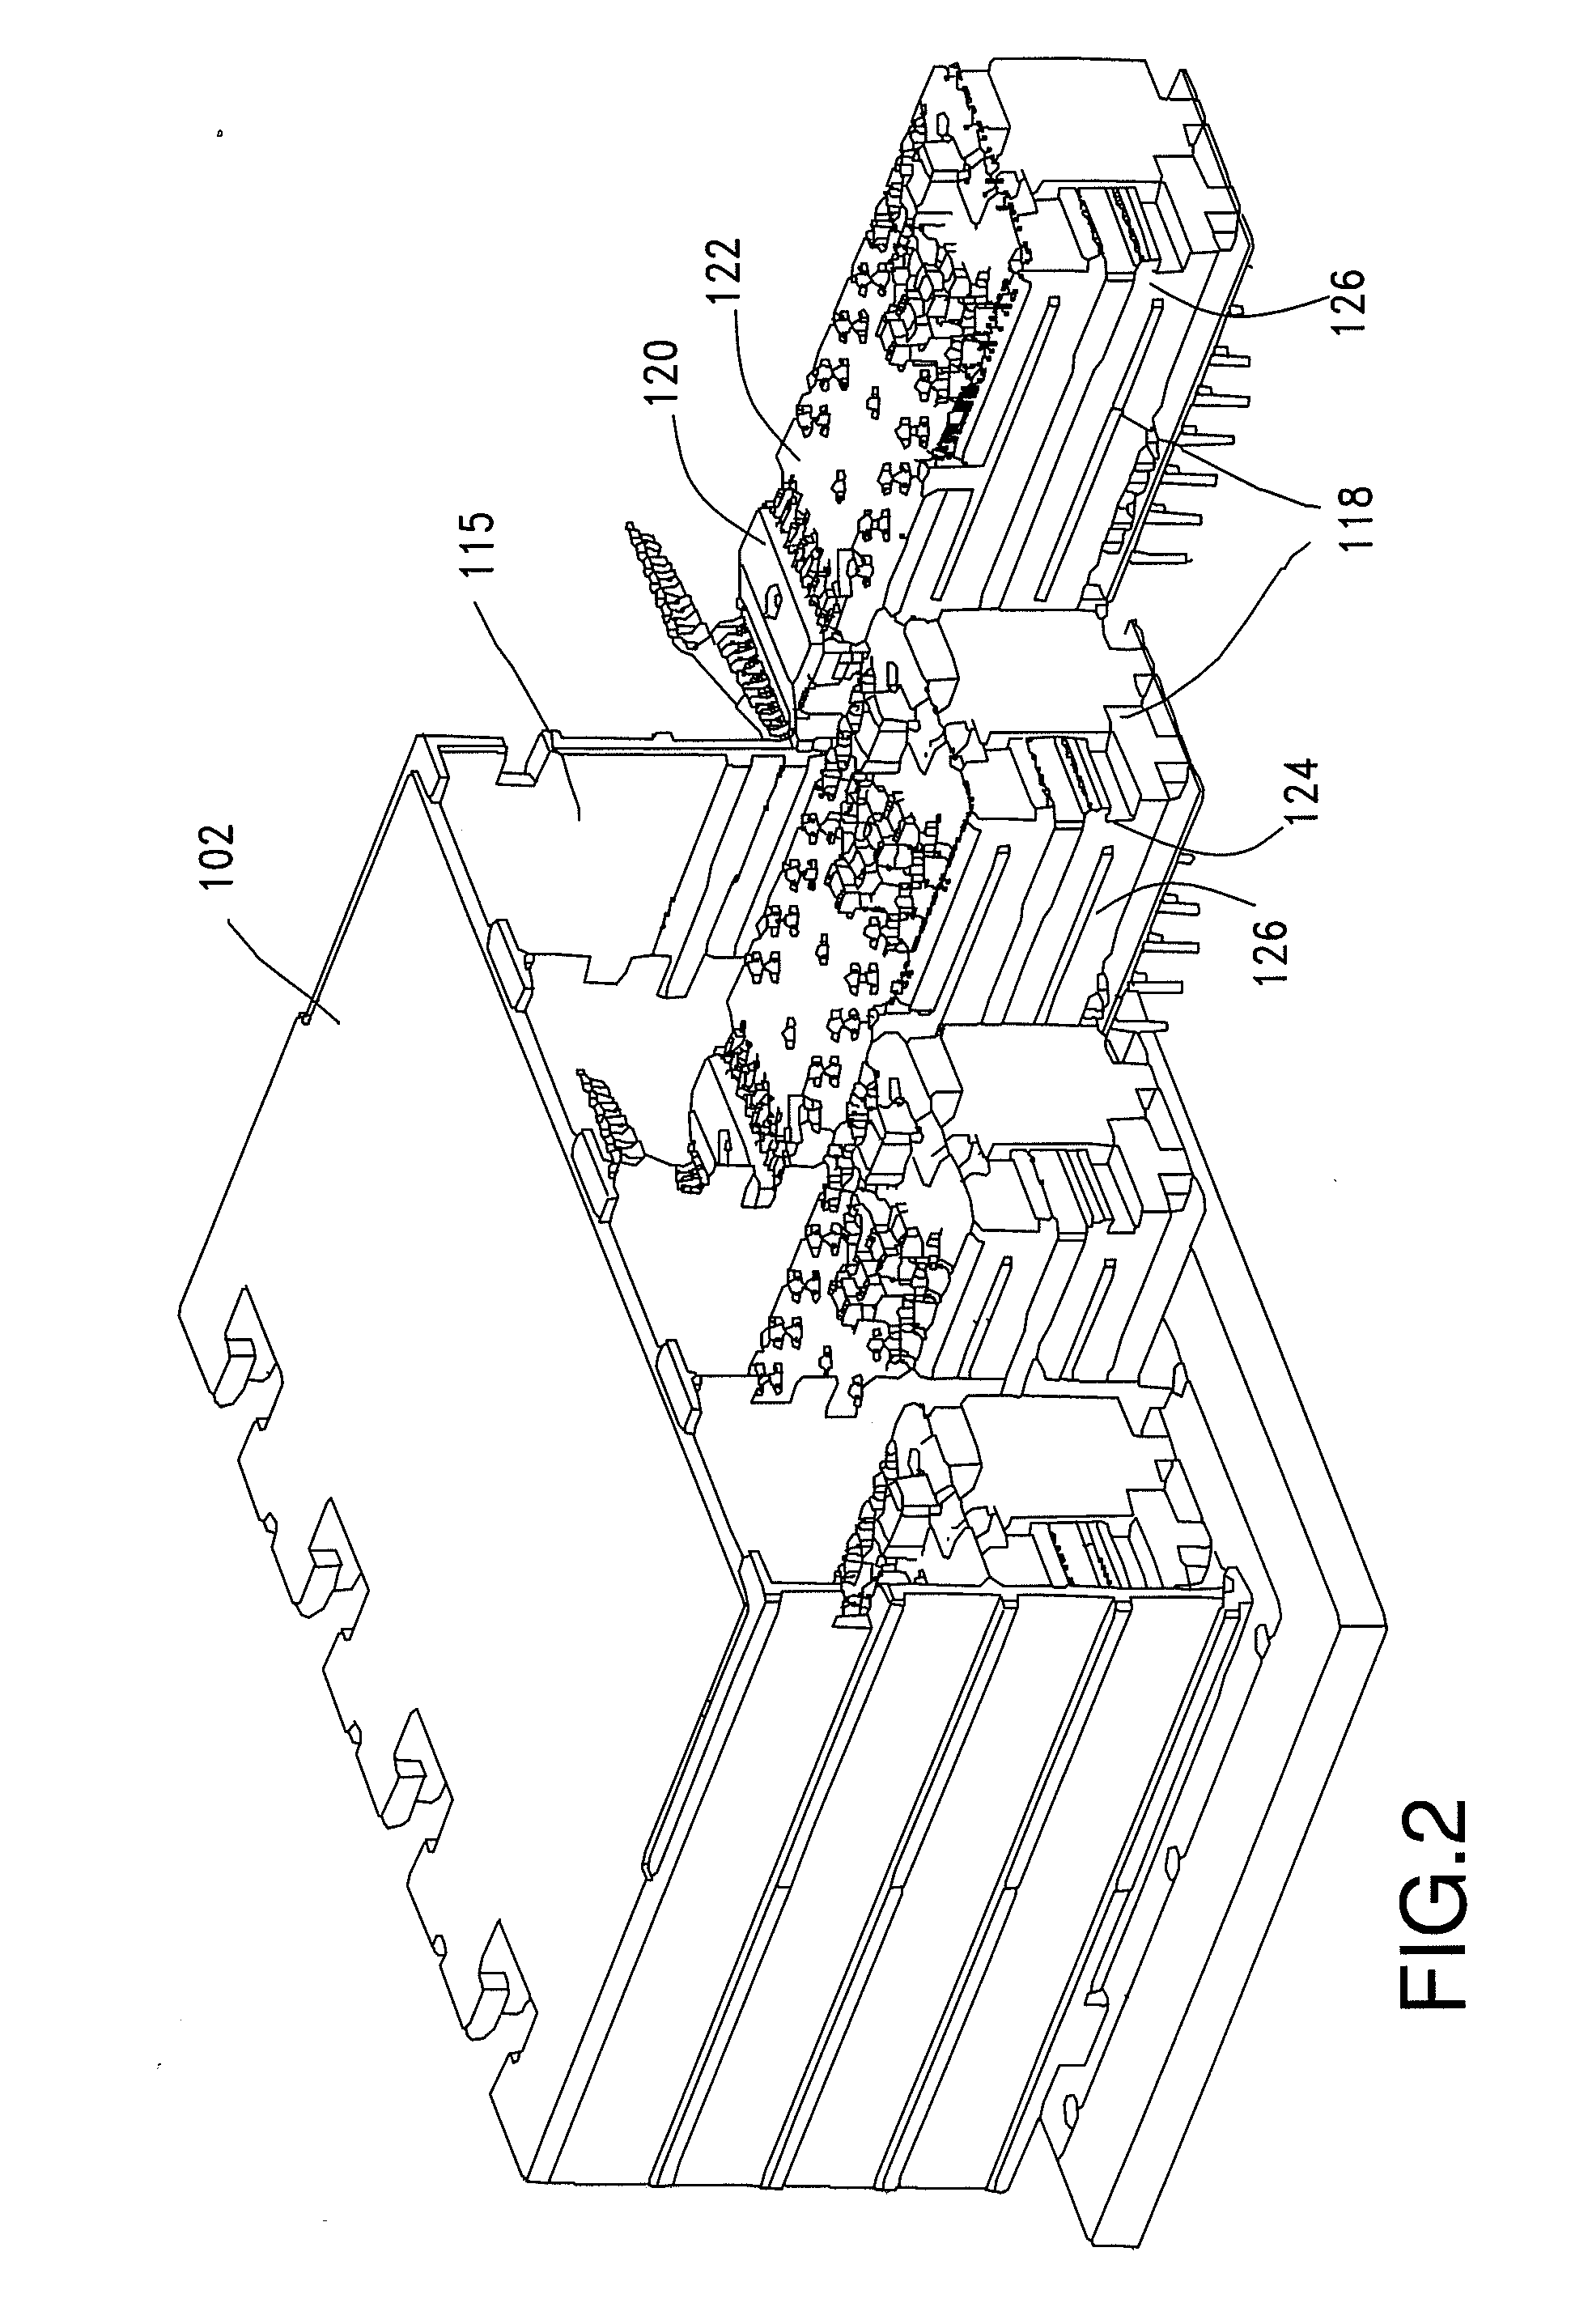 Process and apparatus for removing gaseous contaminants from gas stream comprising gaseous contaminants